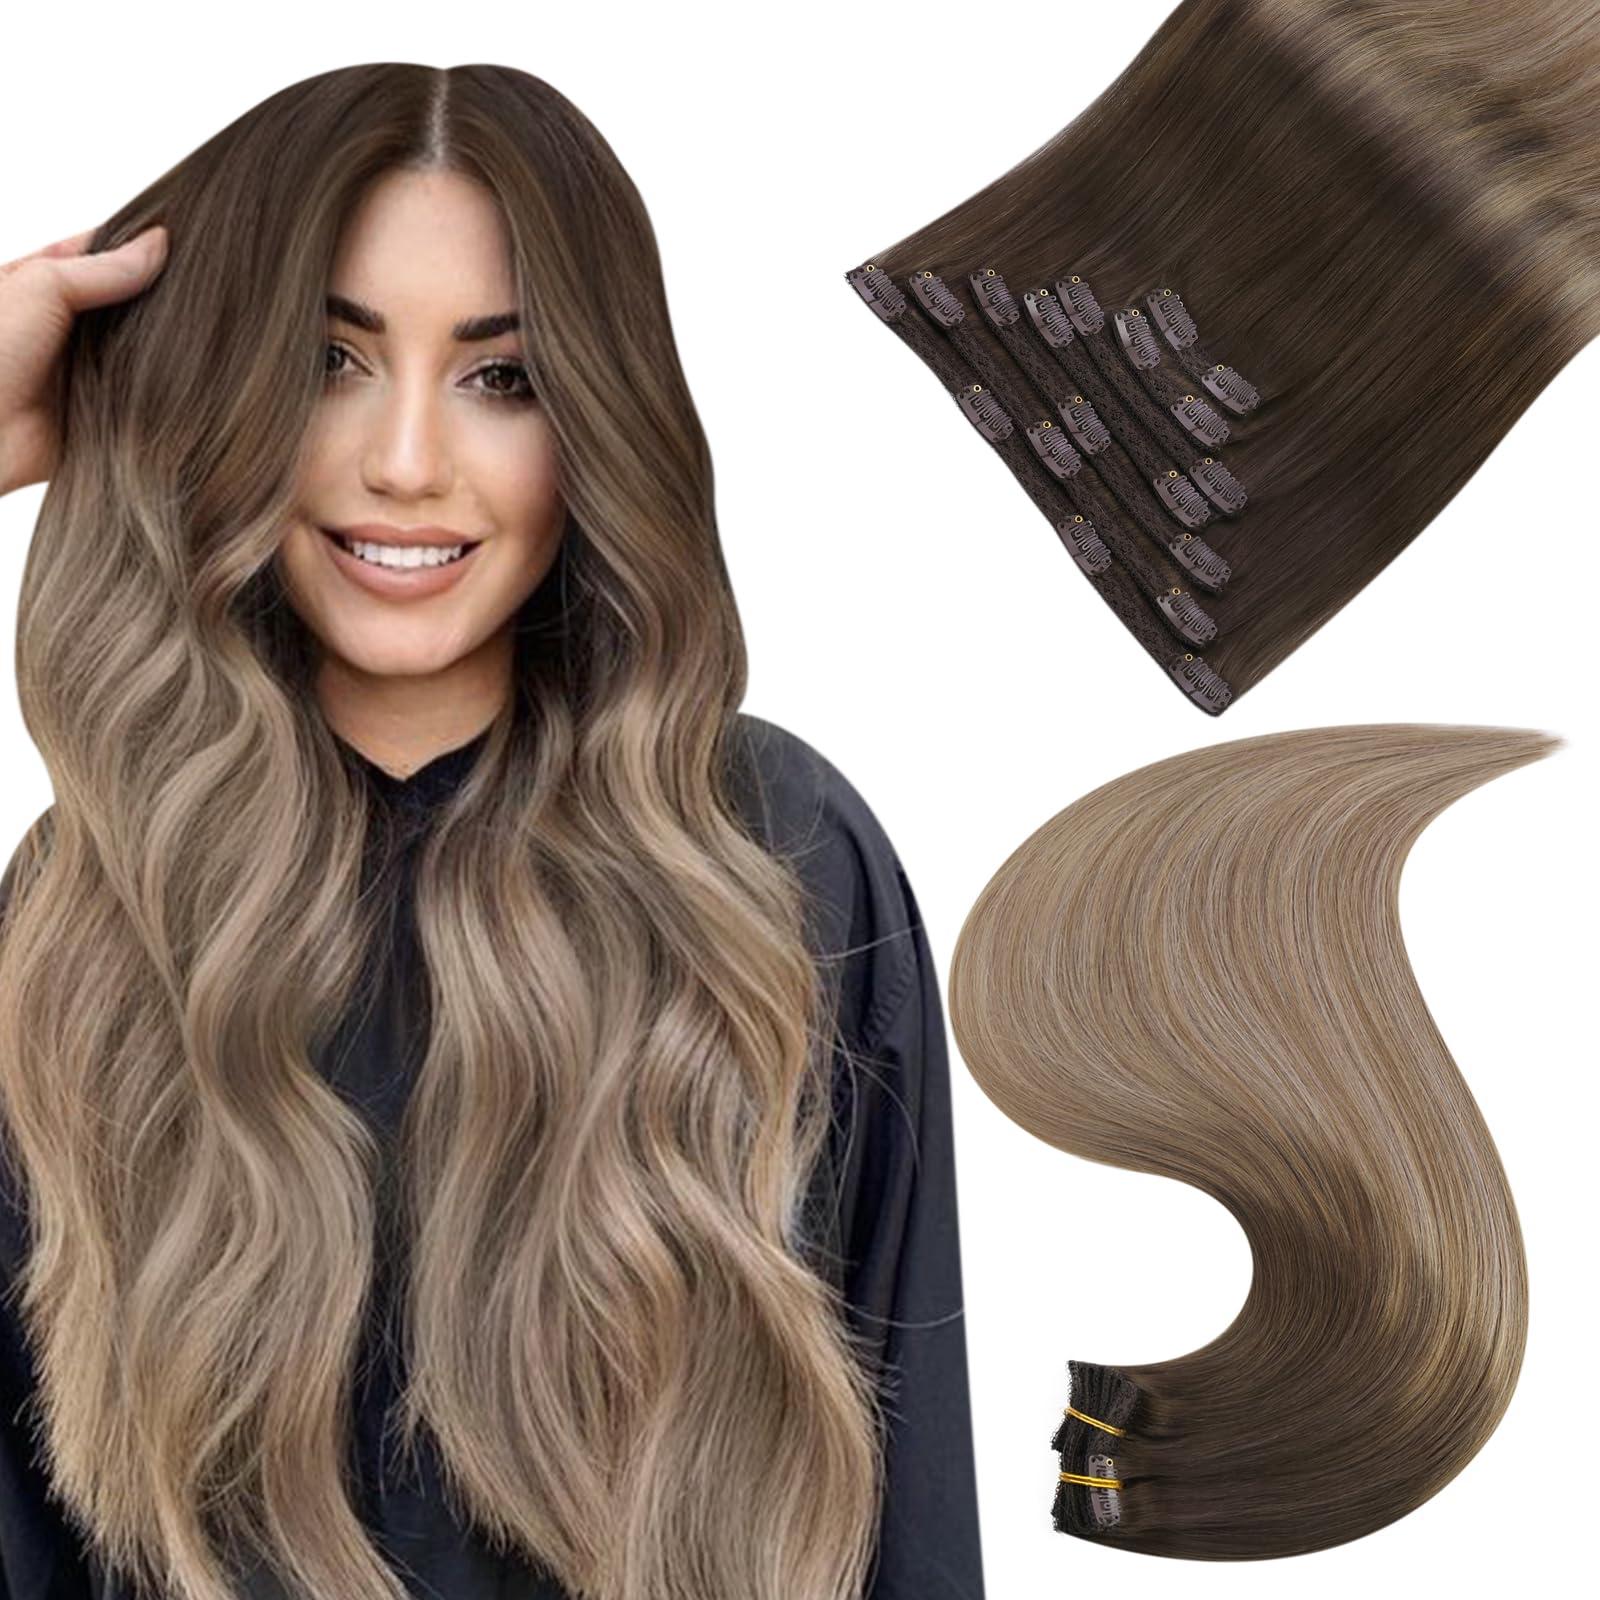 Easyouth Clip in Hair Extensions Human Hair Clip in Extensions Balayage Brown to Blonde Clip in Real Hair Extensions Double Weft Clip in Ombre Hair 18 Inch 7Pcs 120g